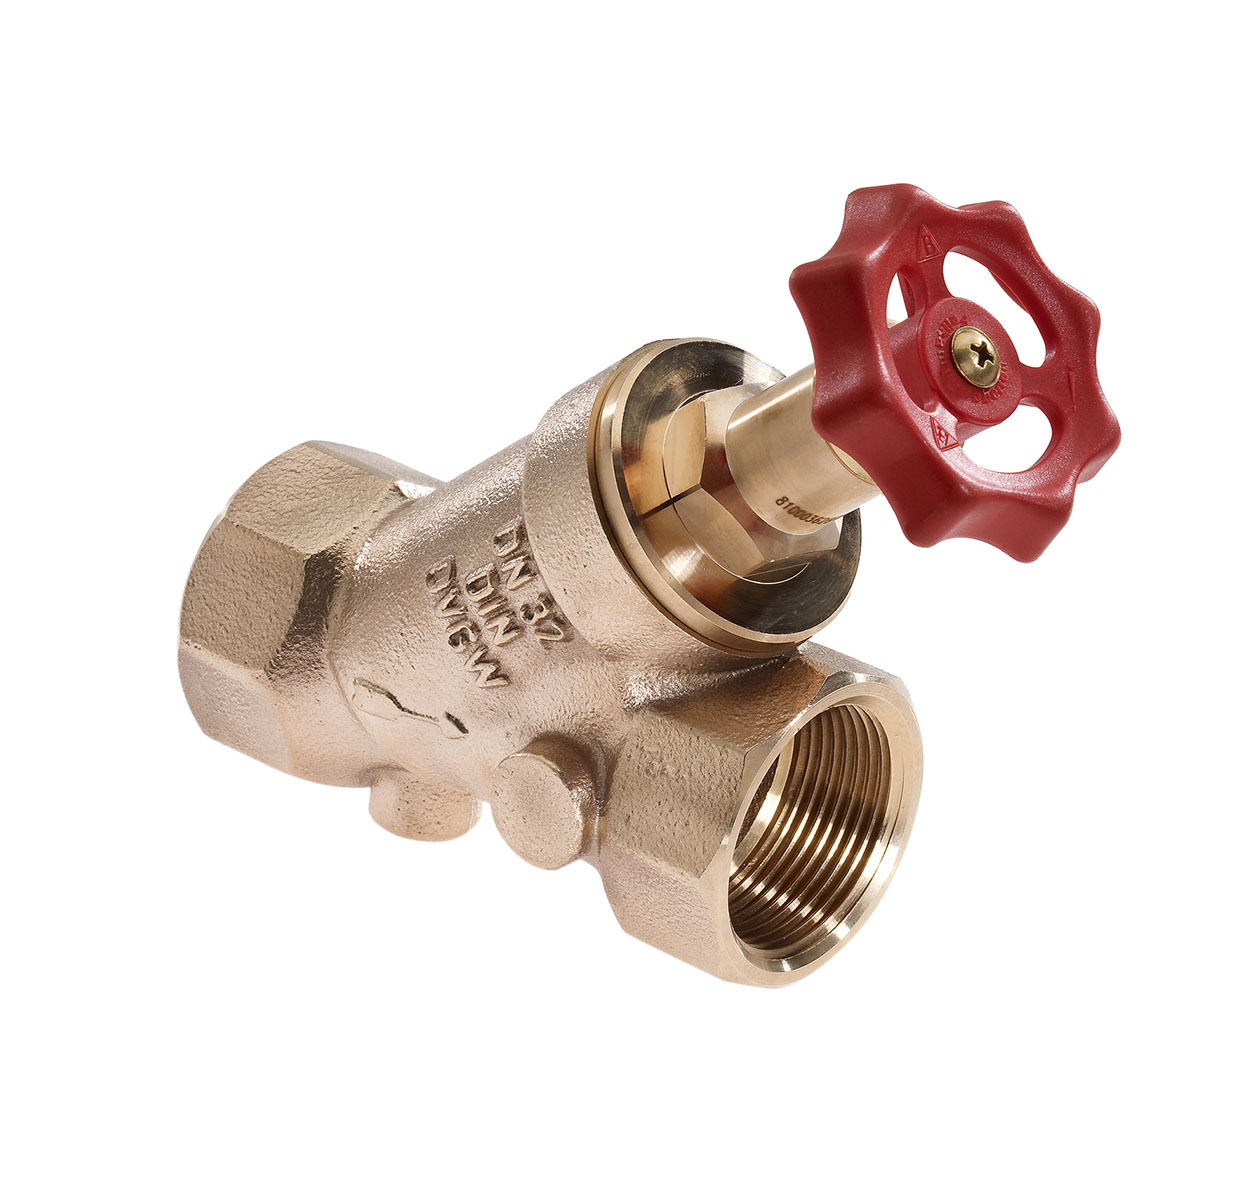 3501400 - Red-brass Free-flow valve female thread, without drain valve